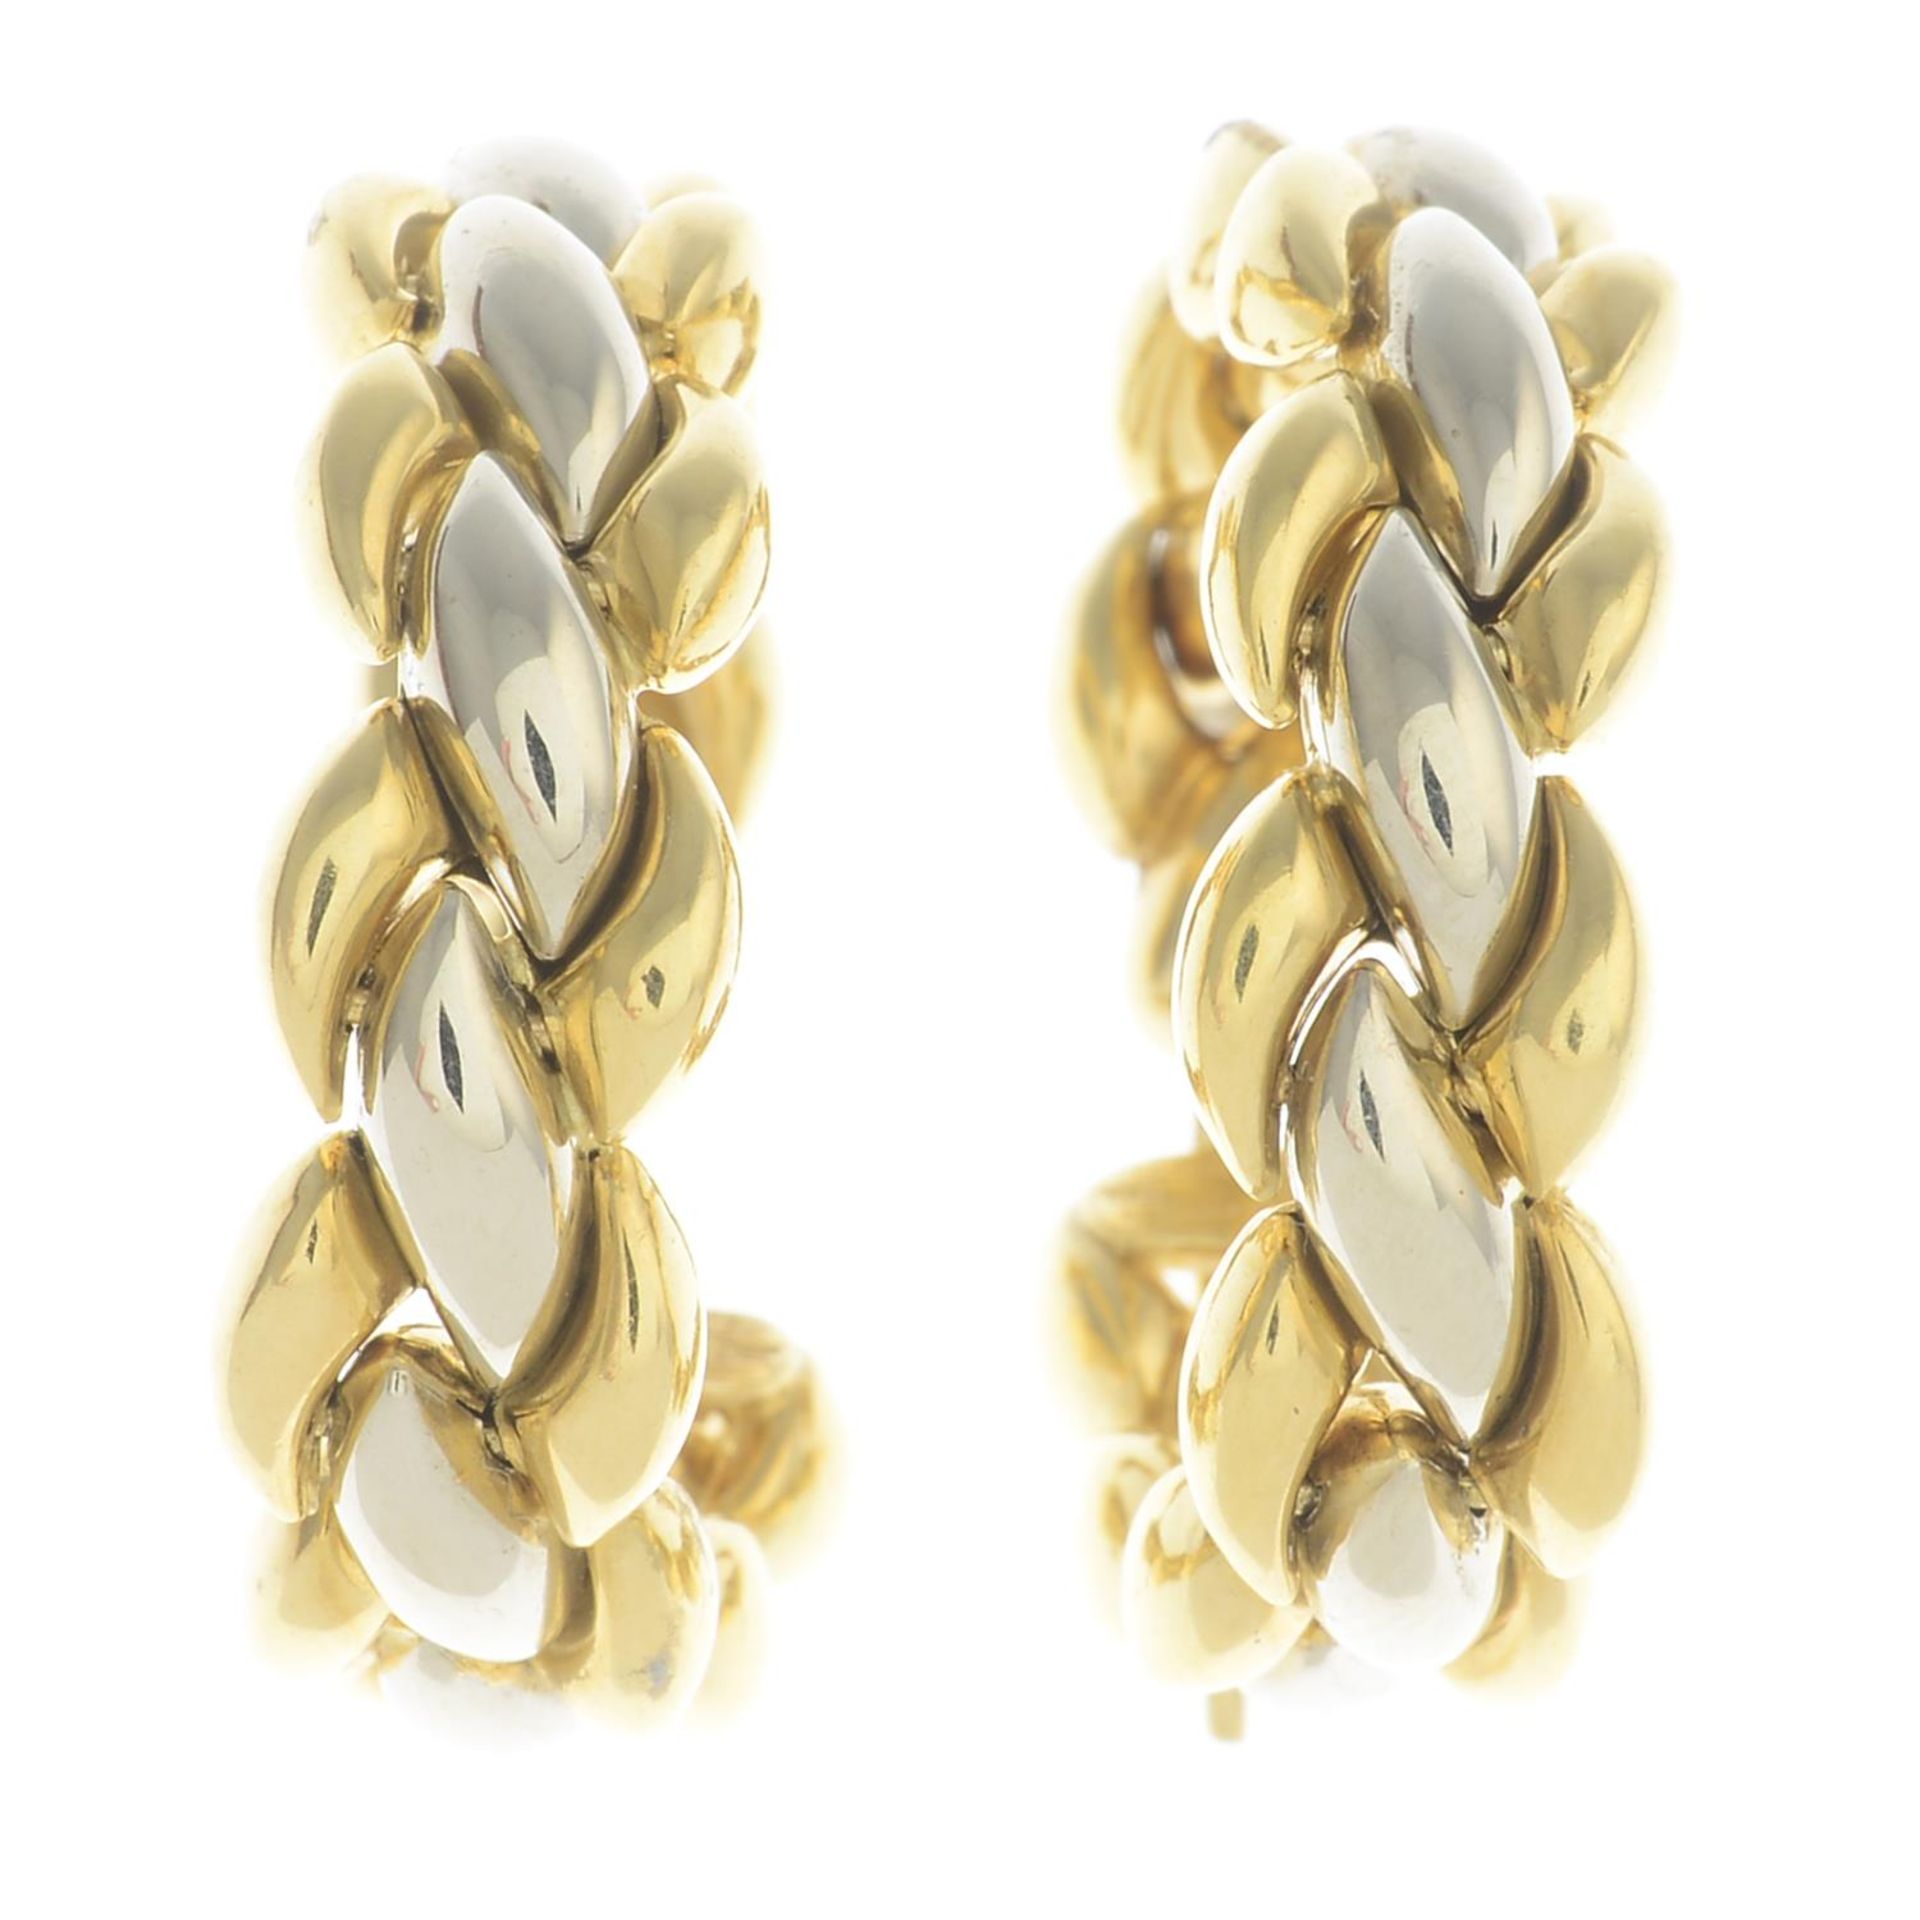 A pair of bi-colour 18ct gold hoop earrings, by Chimento.Signed Chimento. - Image 2 of 3